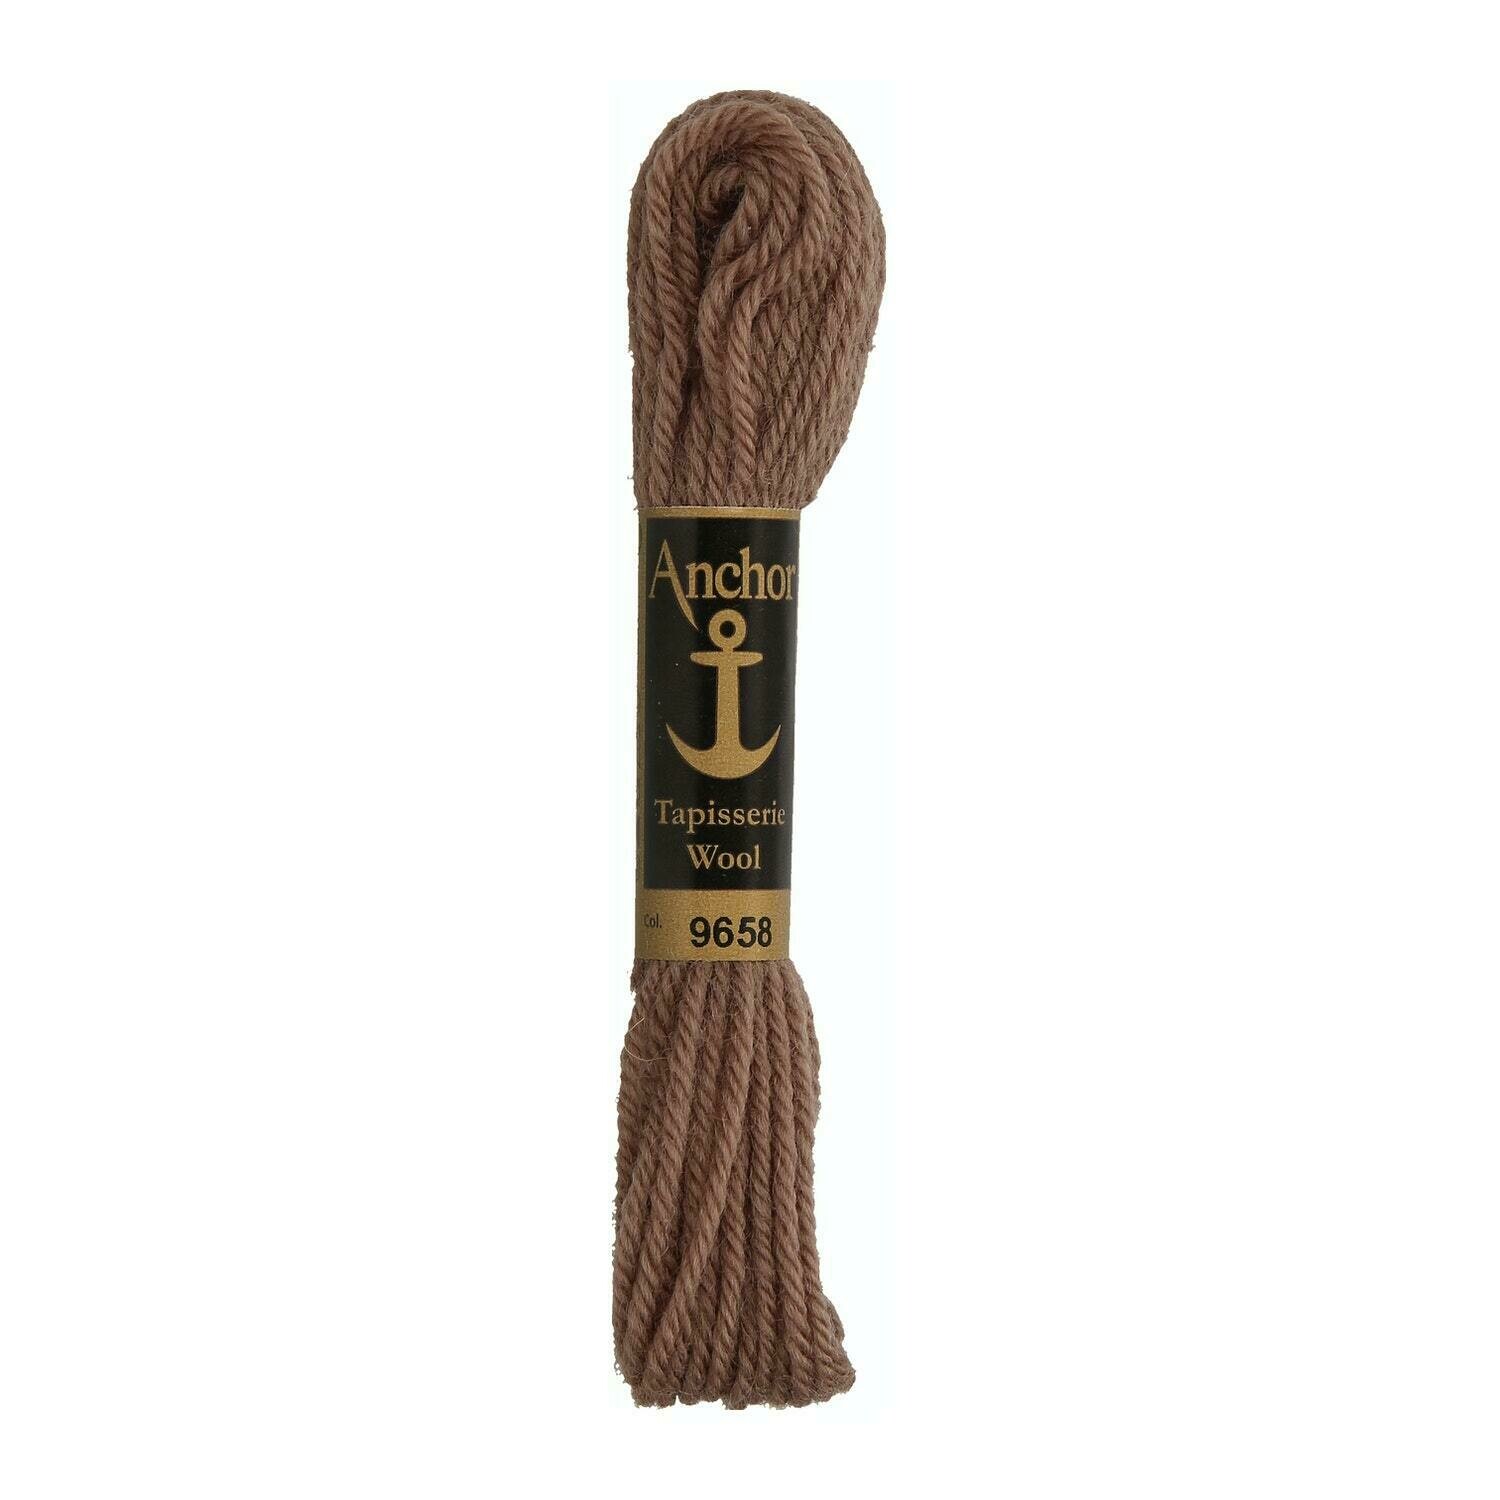 Anchor Tapisserie Wool #09658